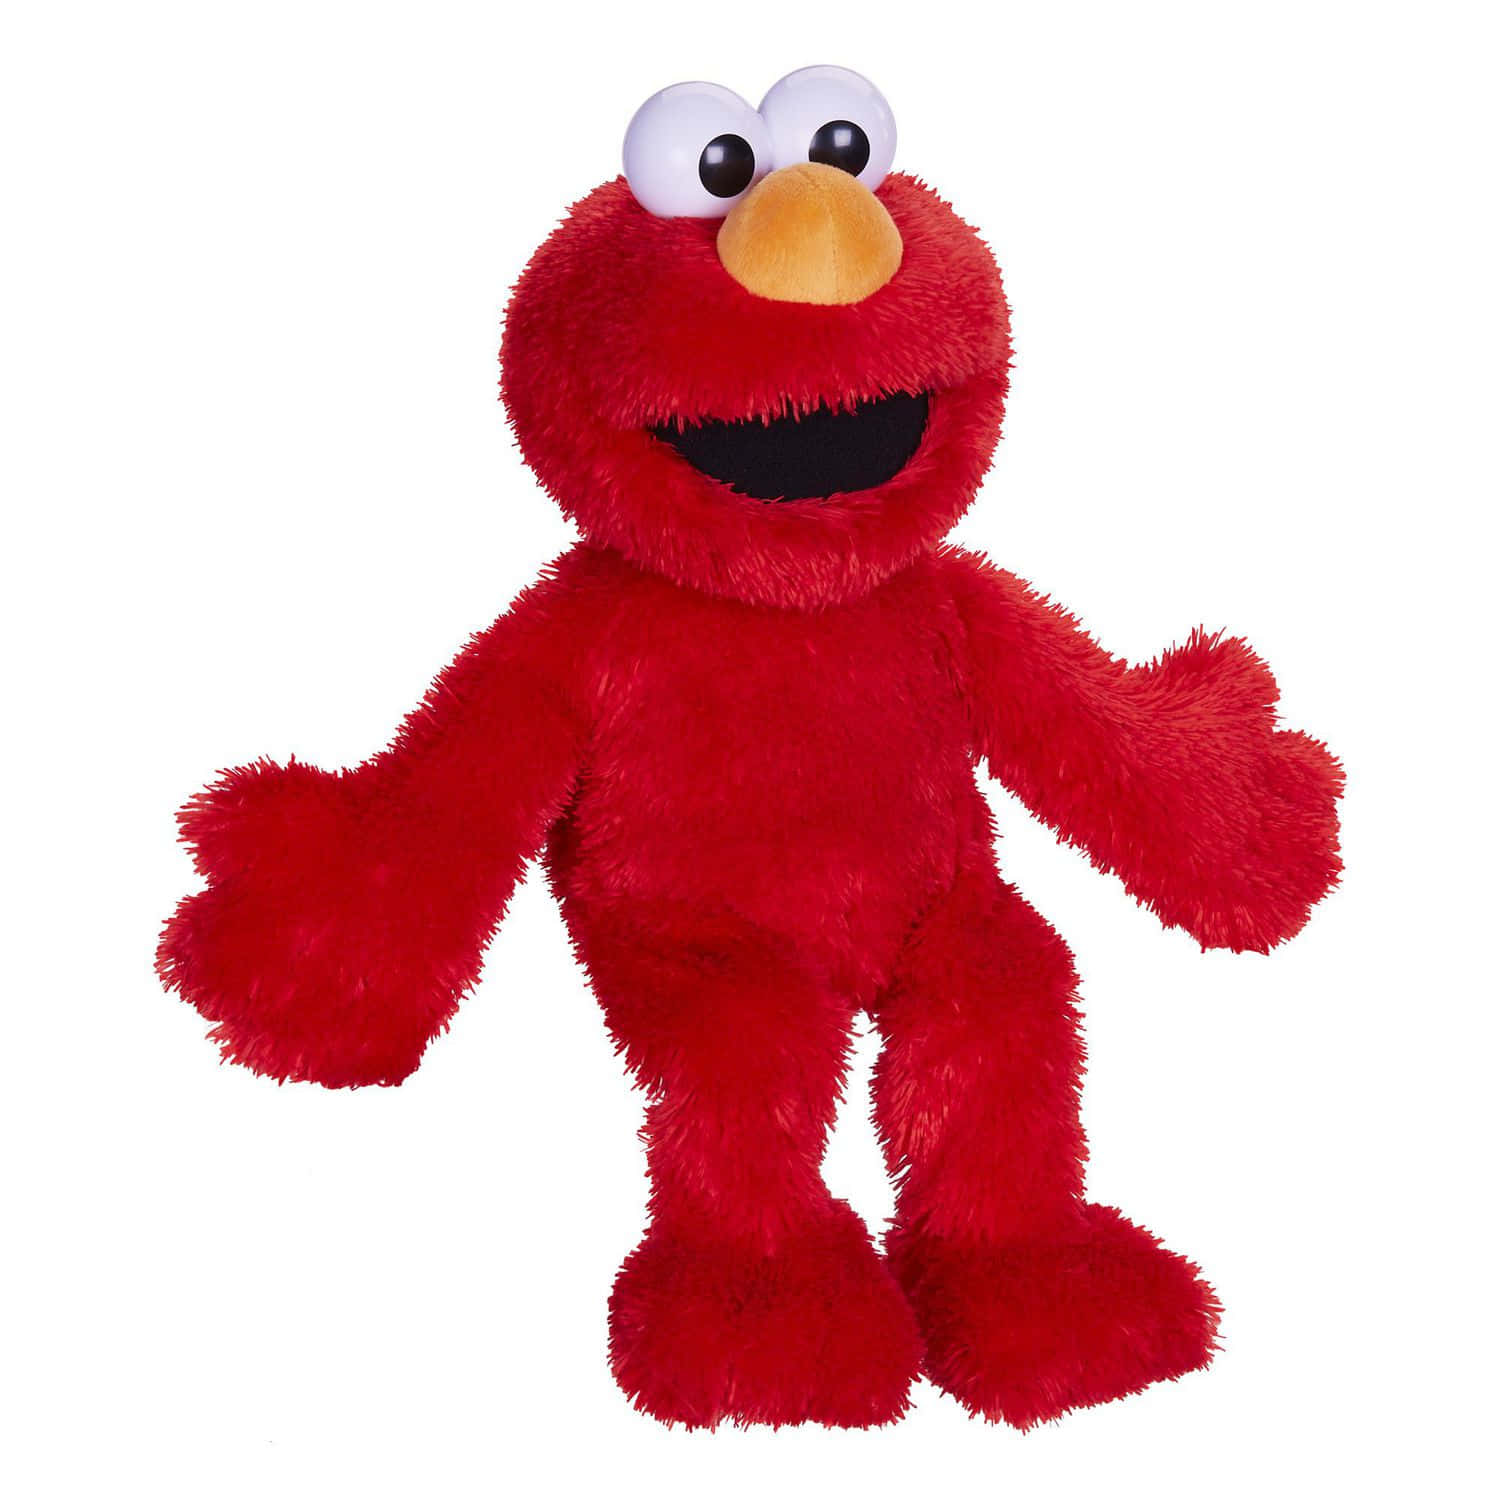 "Experiencing the Joy of Life with Elmo!"